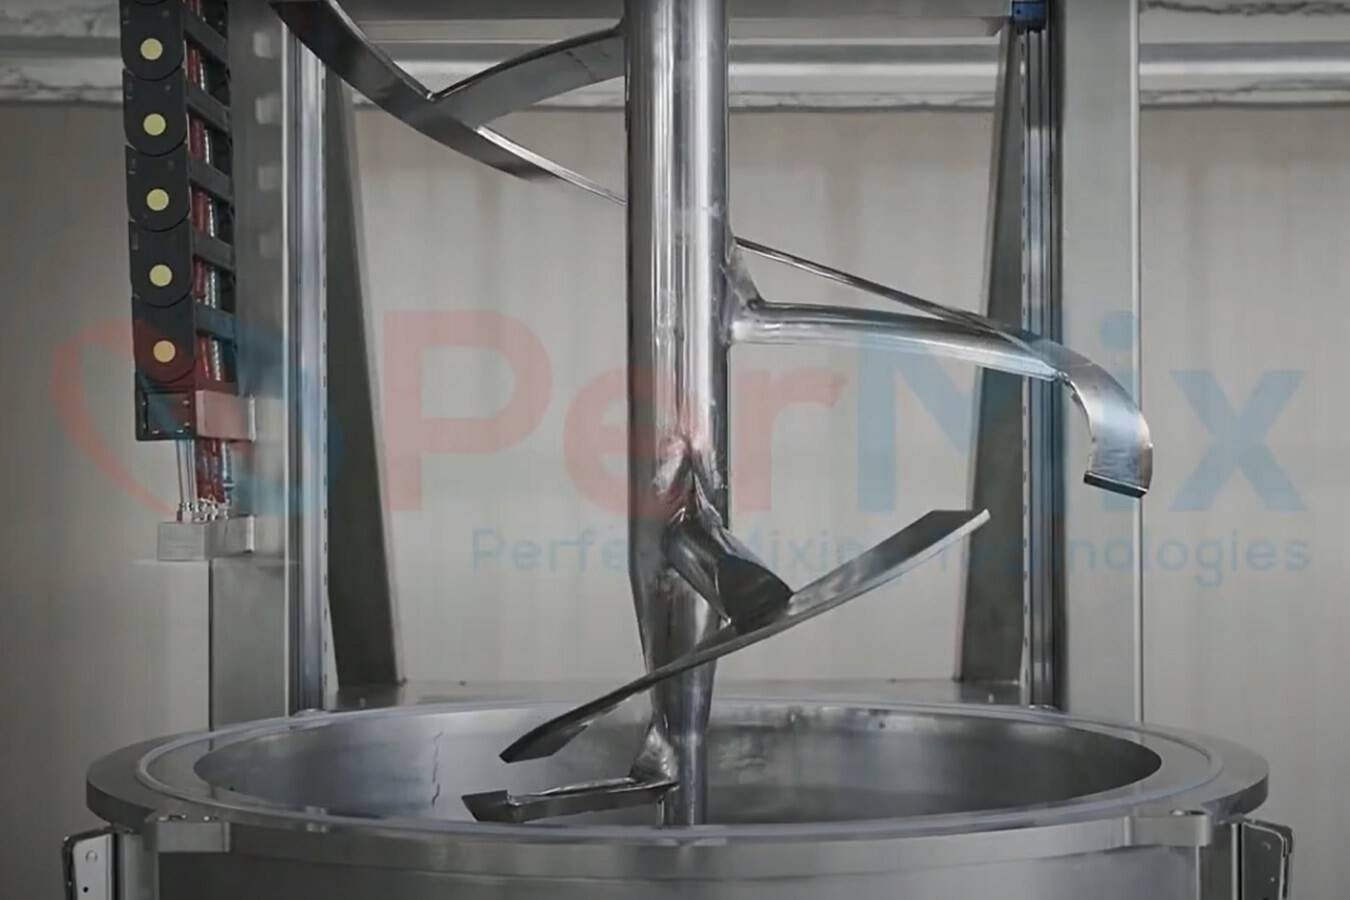 Mixer Cleaning Made Easy With PerMix PerMix makes mixer cleaning easy with our EZ-Clean series mixers.  Eliminate confined space entry to clean the mixers with our EZ-Clean series mixers 